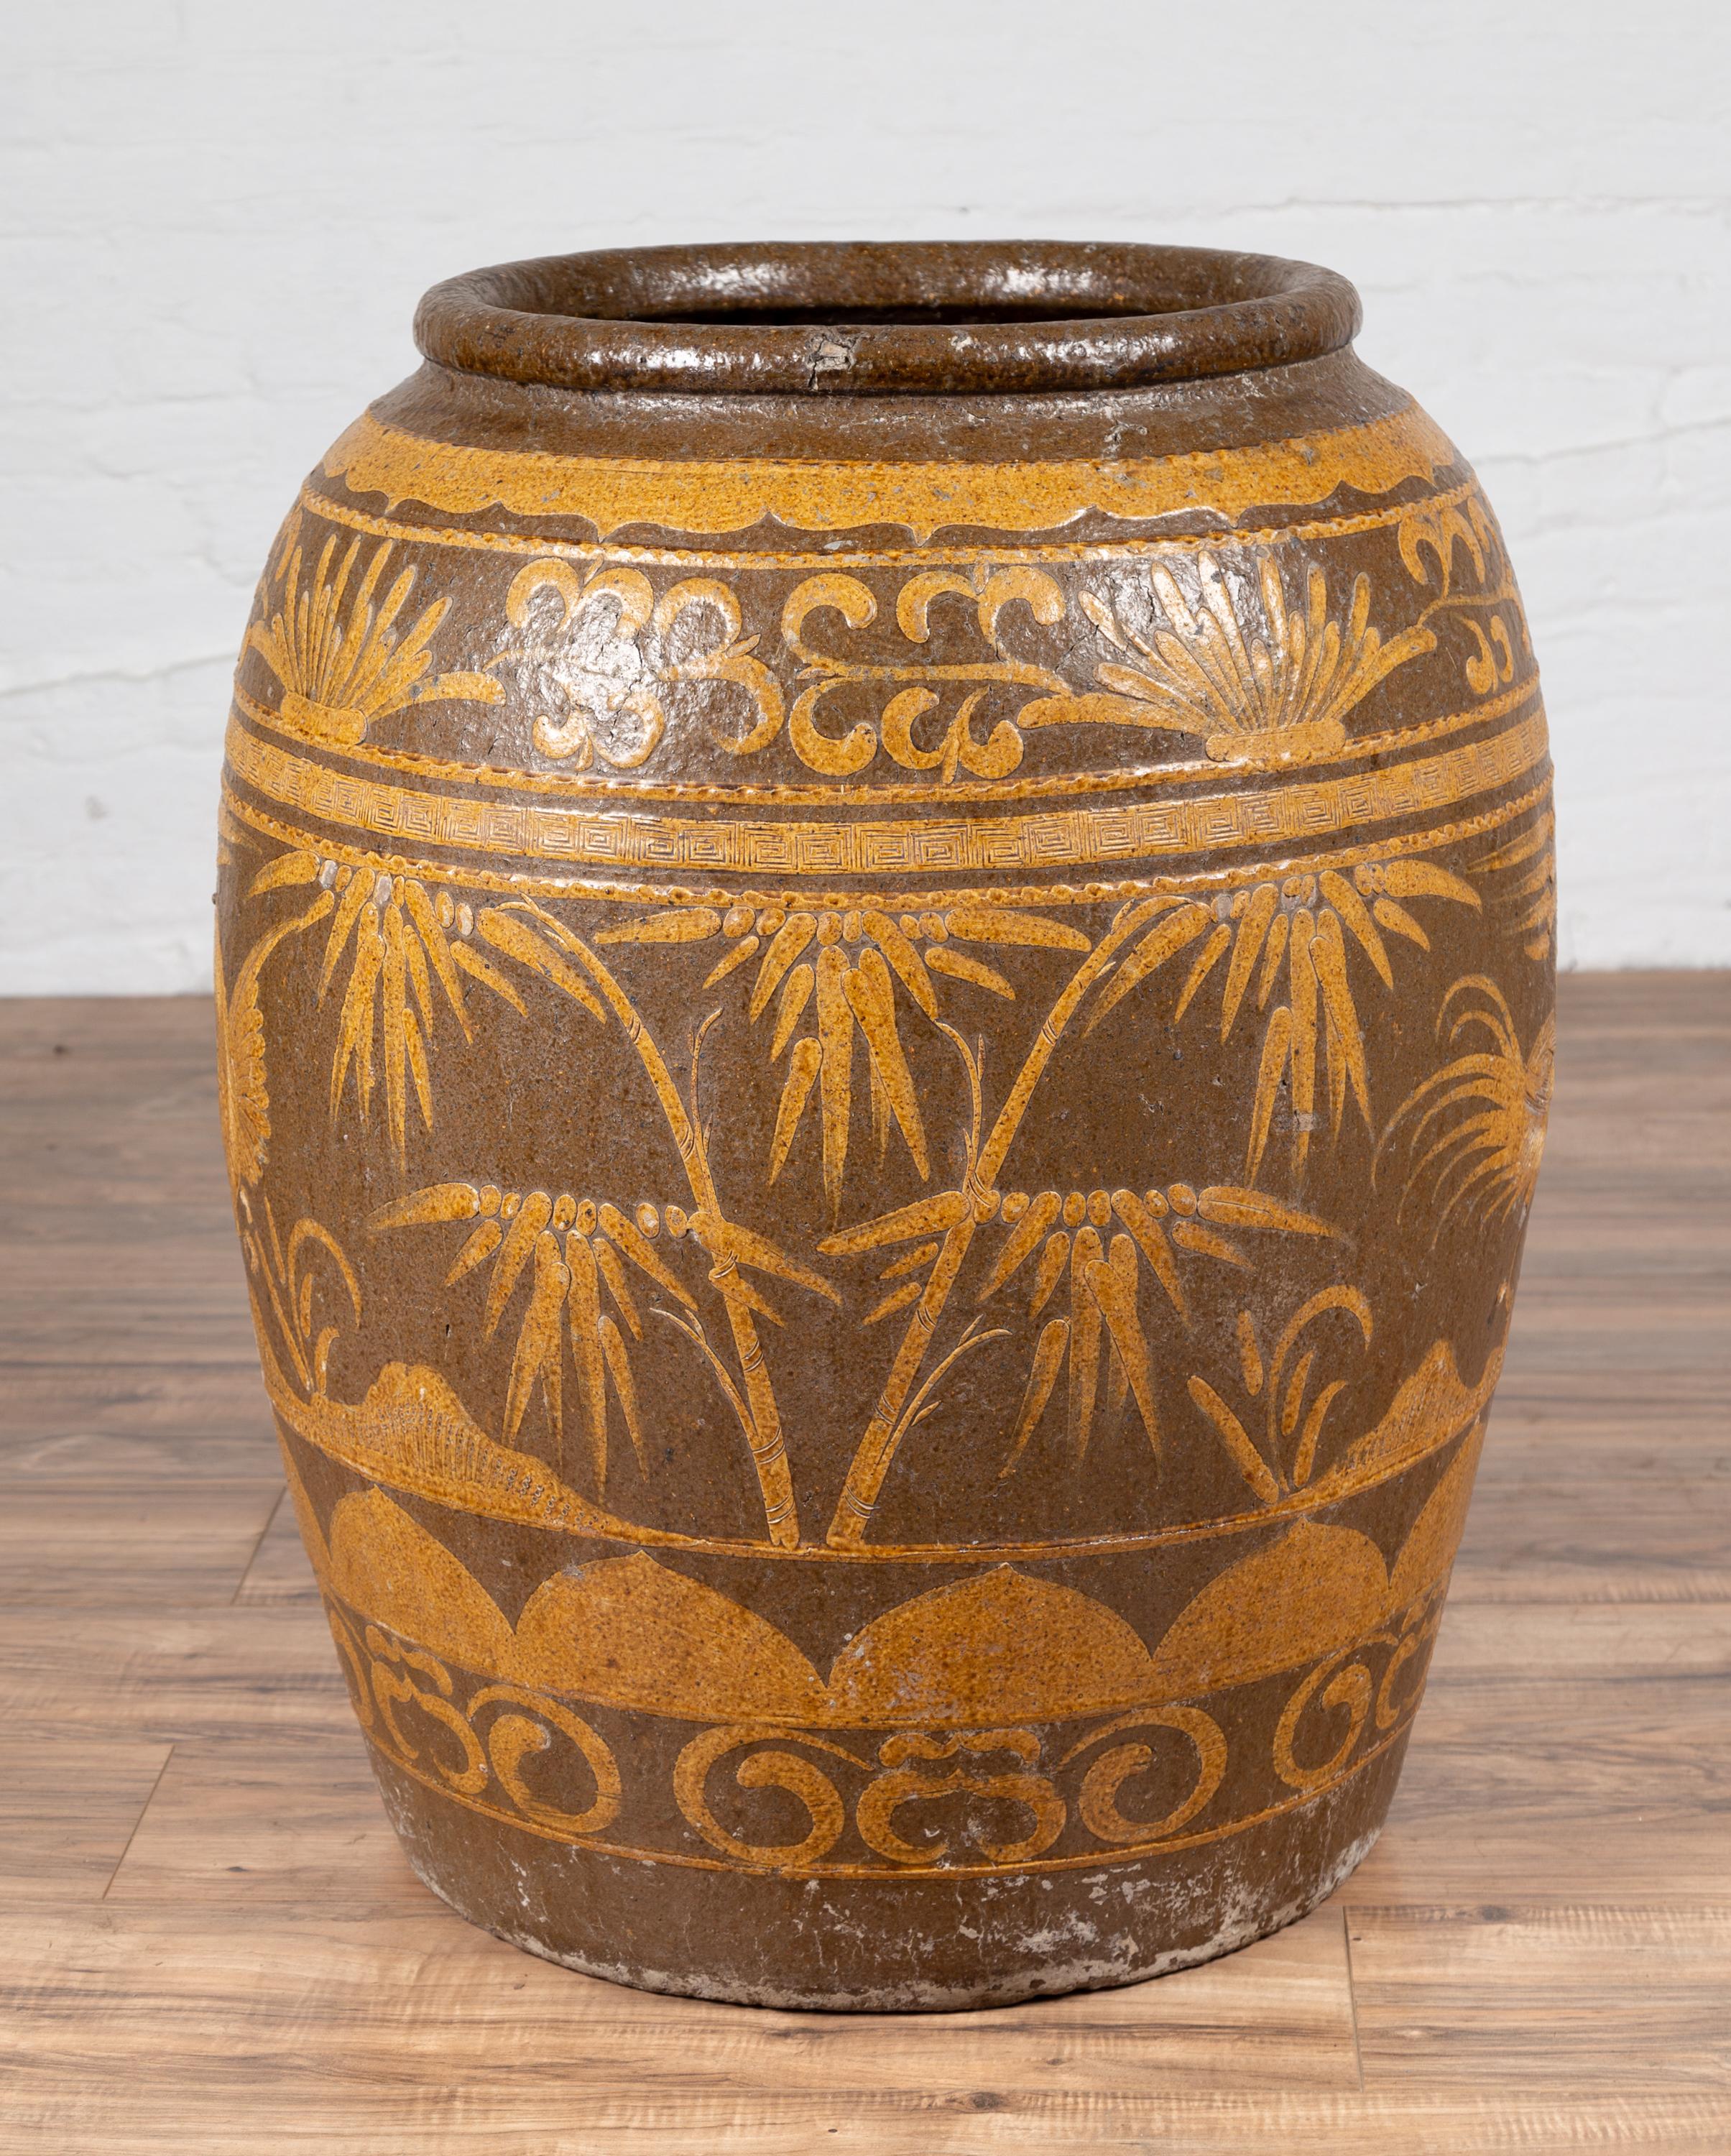 Large Chinese Antique Jar with Mustard Glaze, Bird and Floral Motifs, circa 1900 For Sale 2